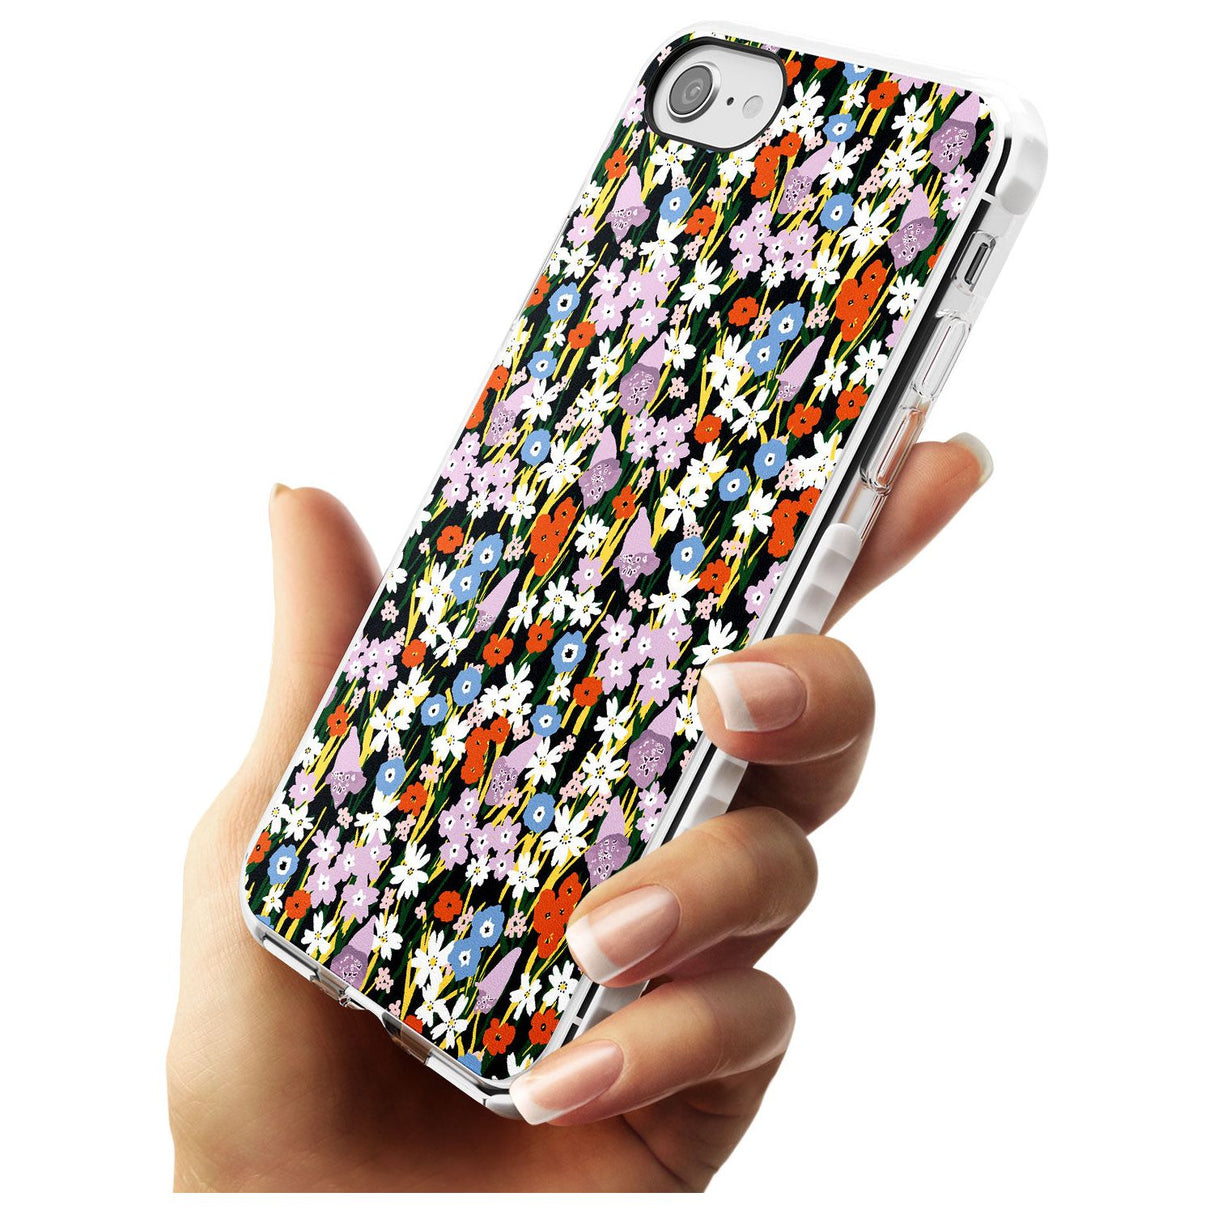 Energetic Floral Mix: Solid Slim TPU Phone Case for iPhone SE 8 7 Plus